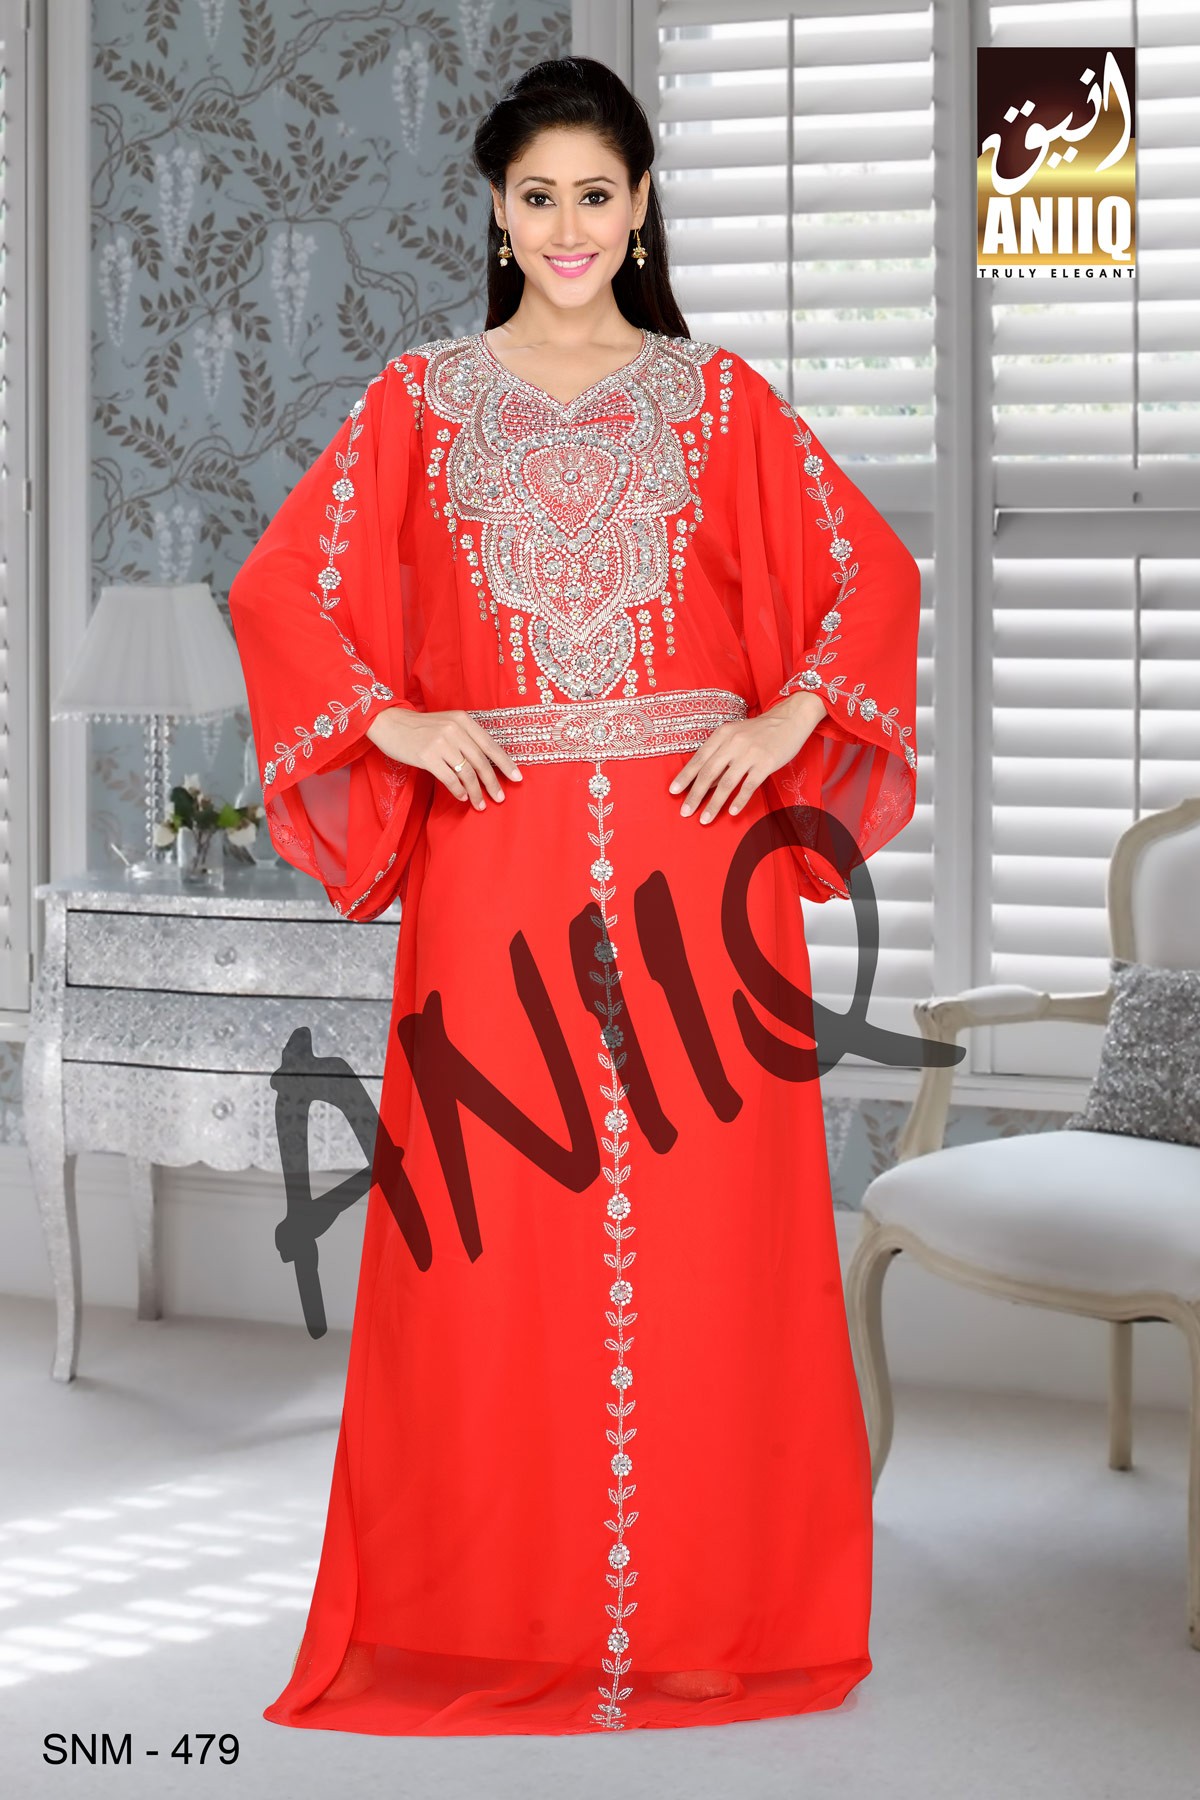 Red   Embroidered   Faux Georgette   Farasha